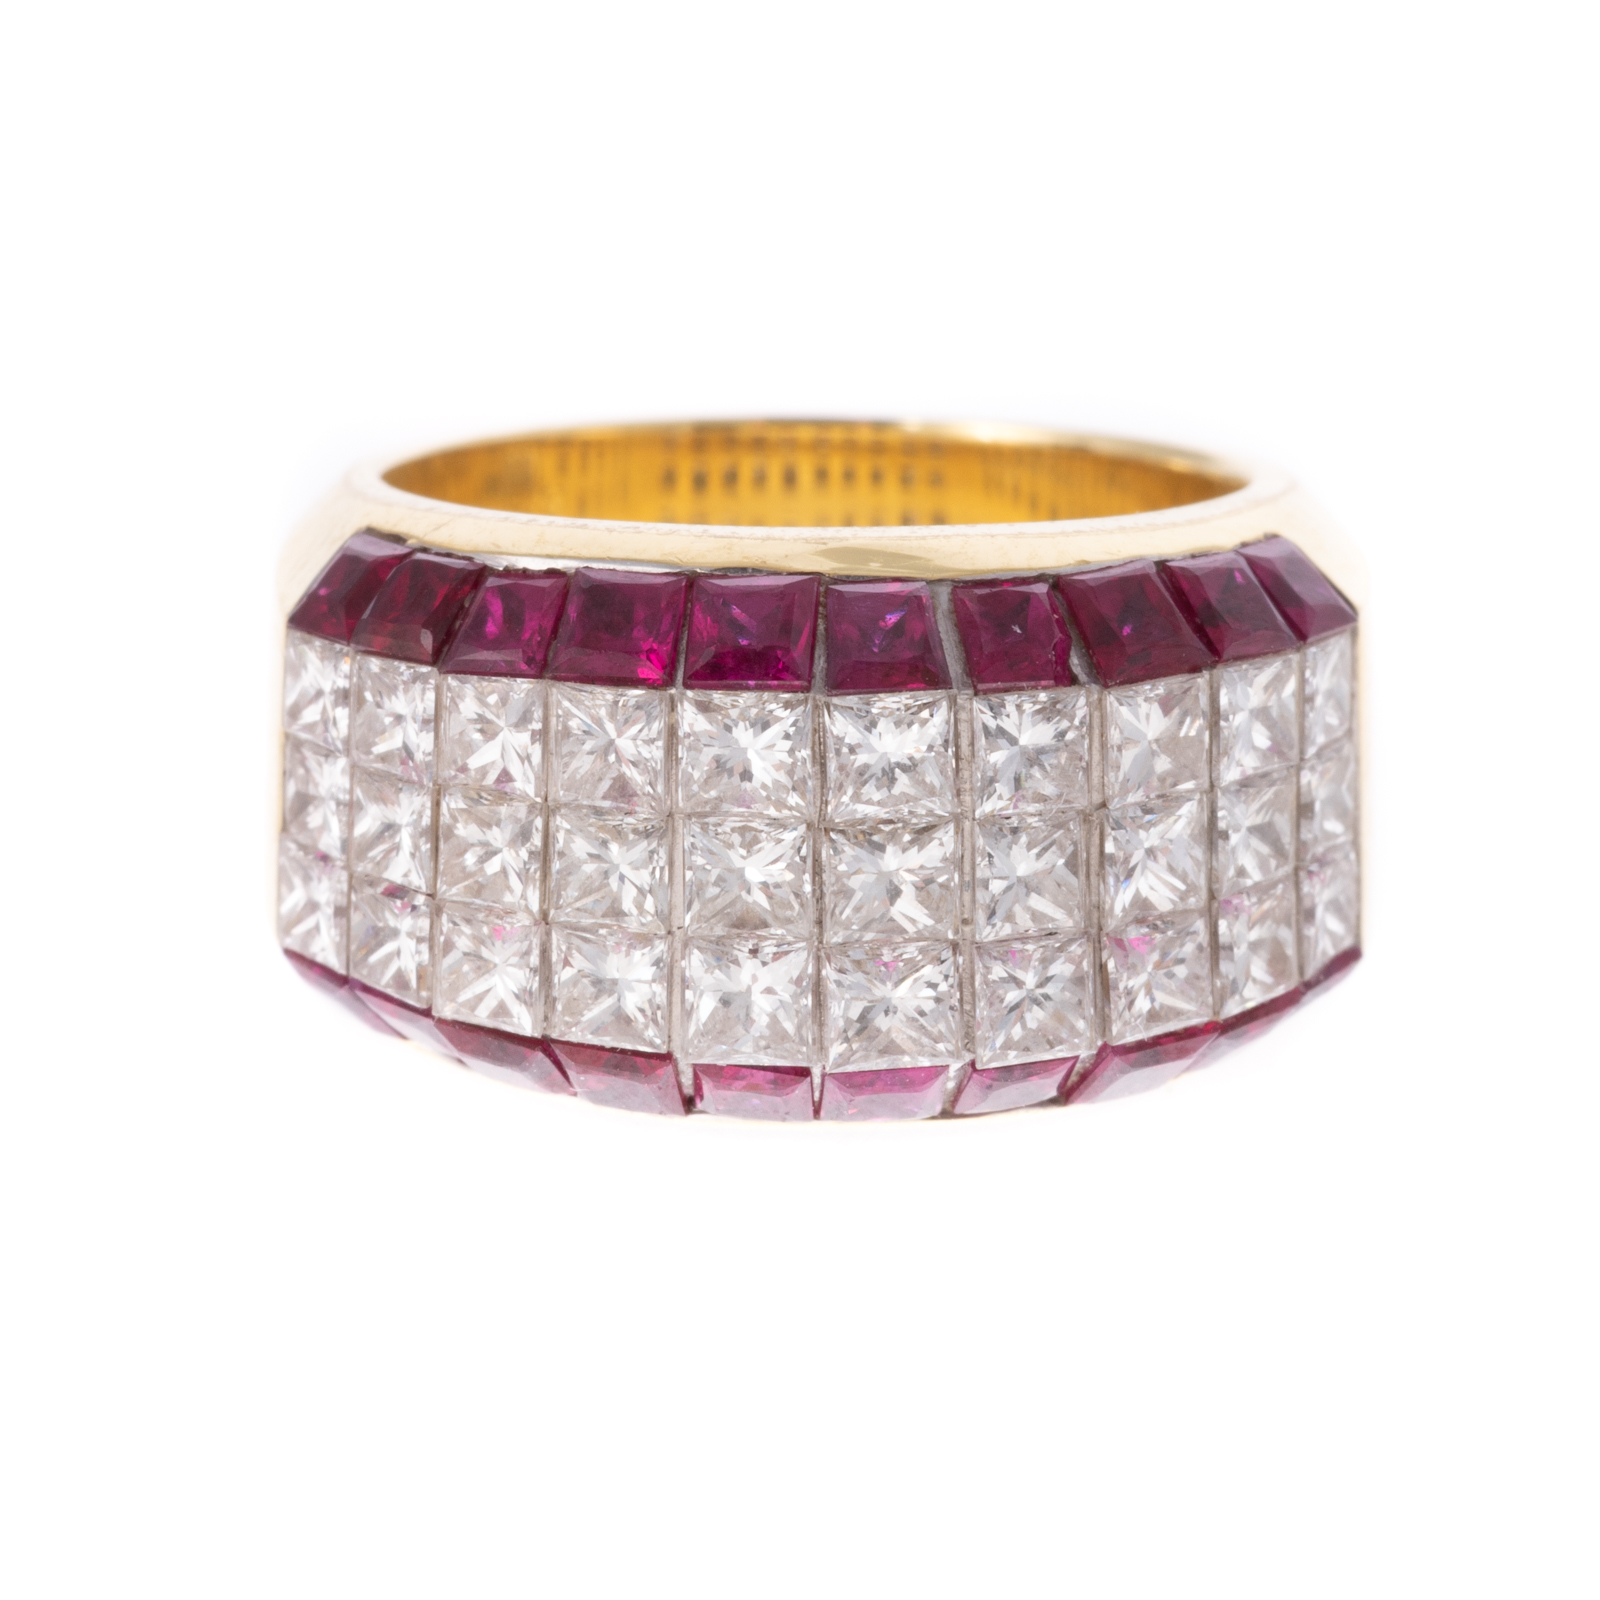 A DIAMOND RUBY BAND IN 18K BY 369a8b